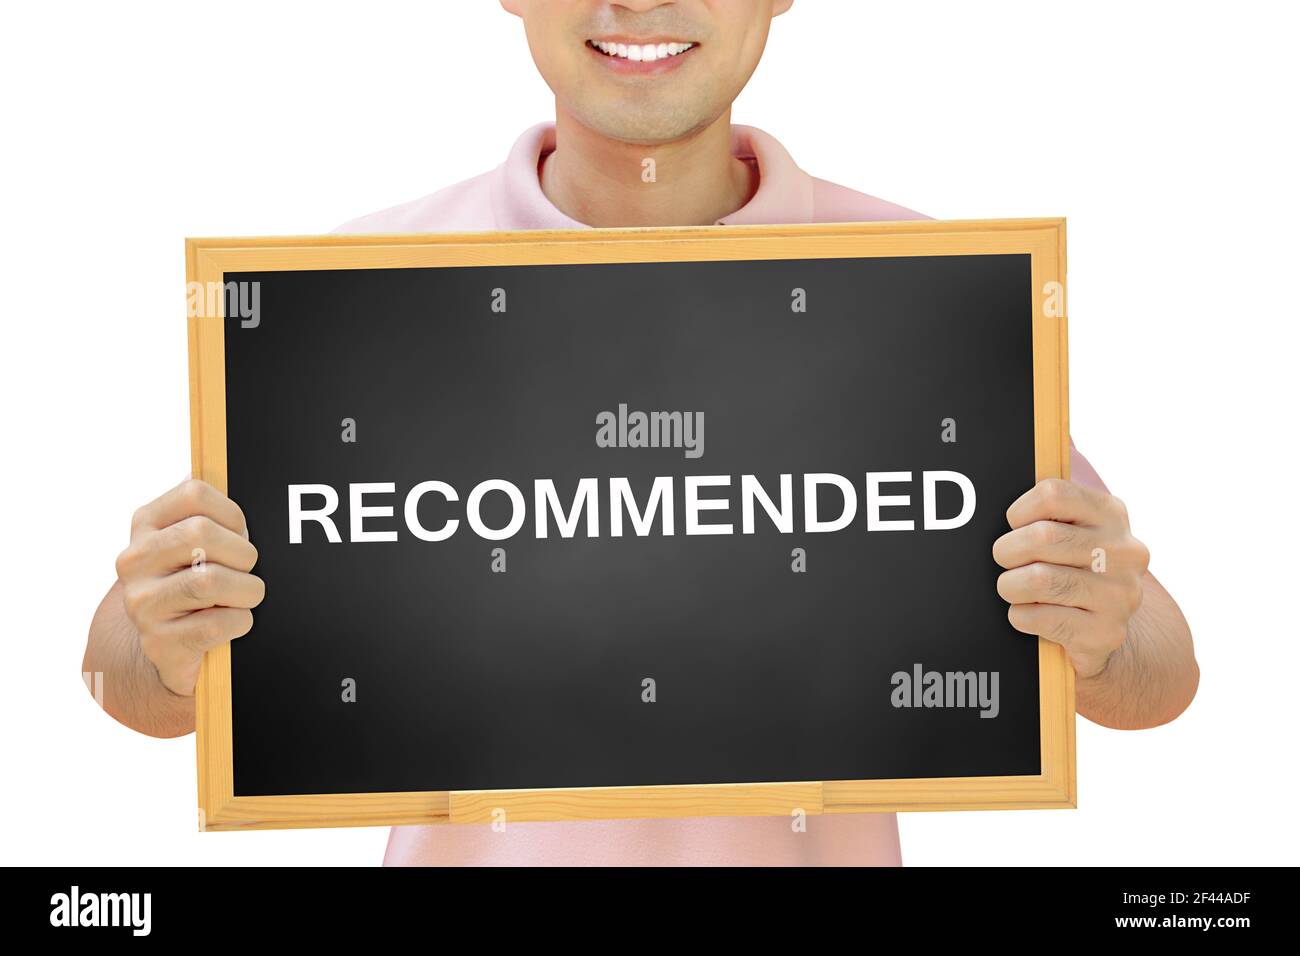 RECOMMENDED word on blackboard held by smiling man Stock Photo